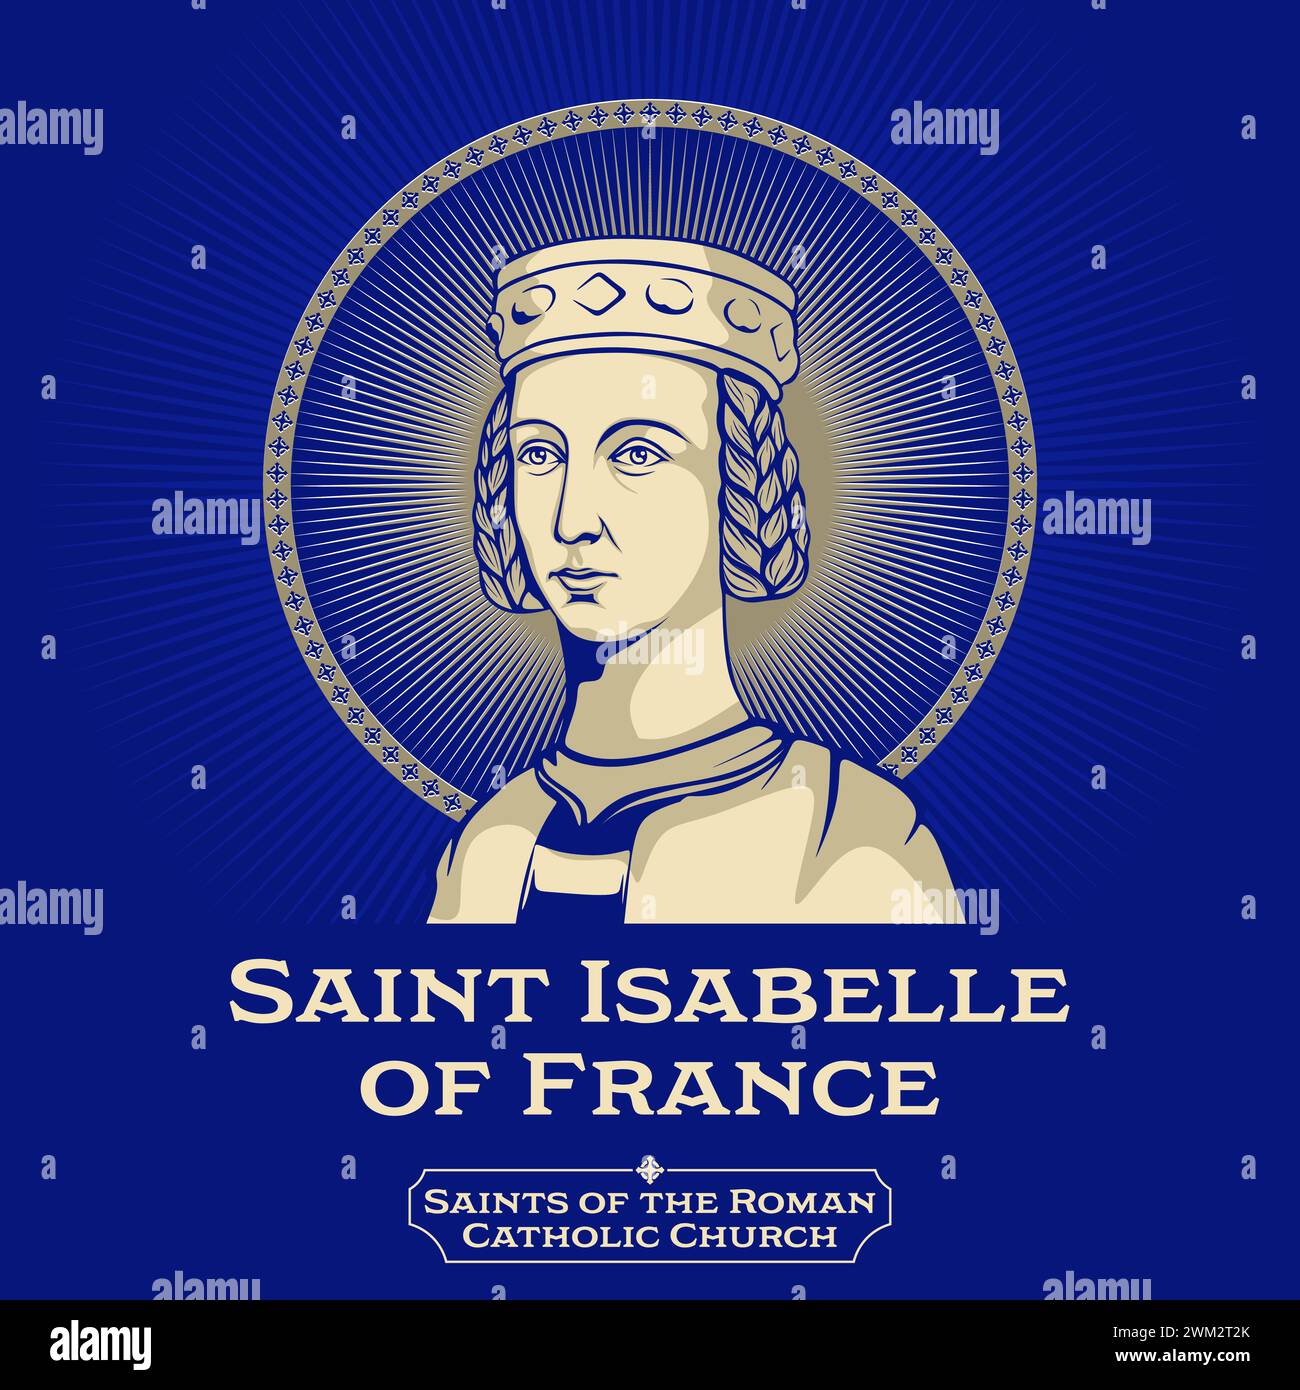 Saints of the Catholic Church. Saint Isabelle of France (1225-1270) was a French princess and daughter of Louis VIII of France and Blanche of Castile. Stock Vector